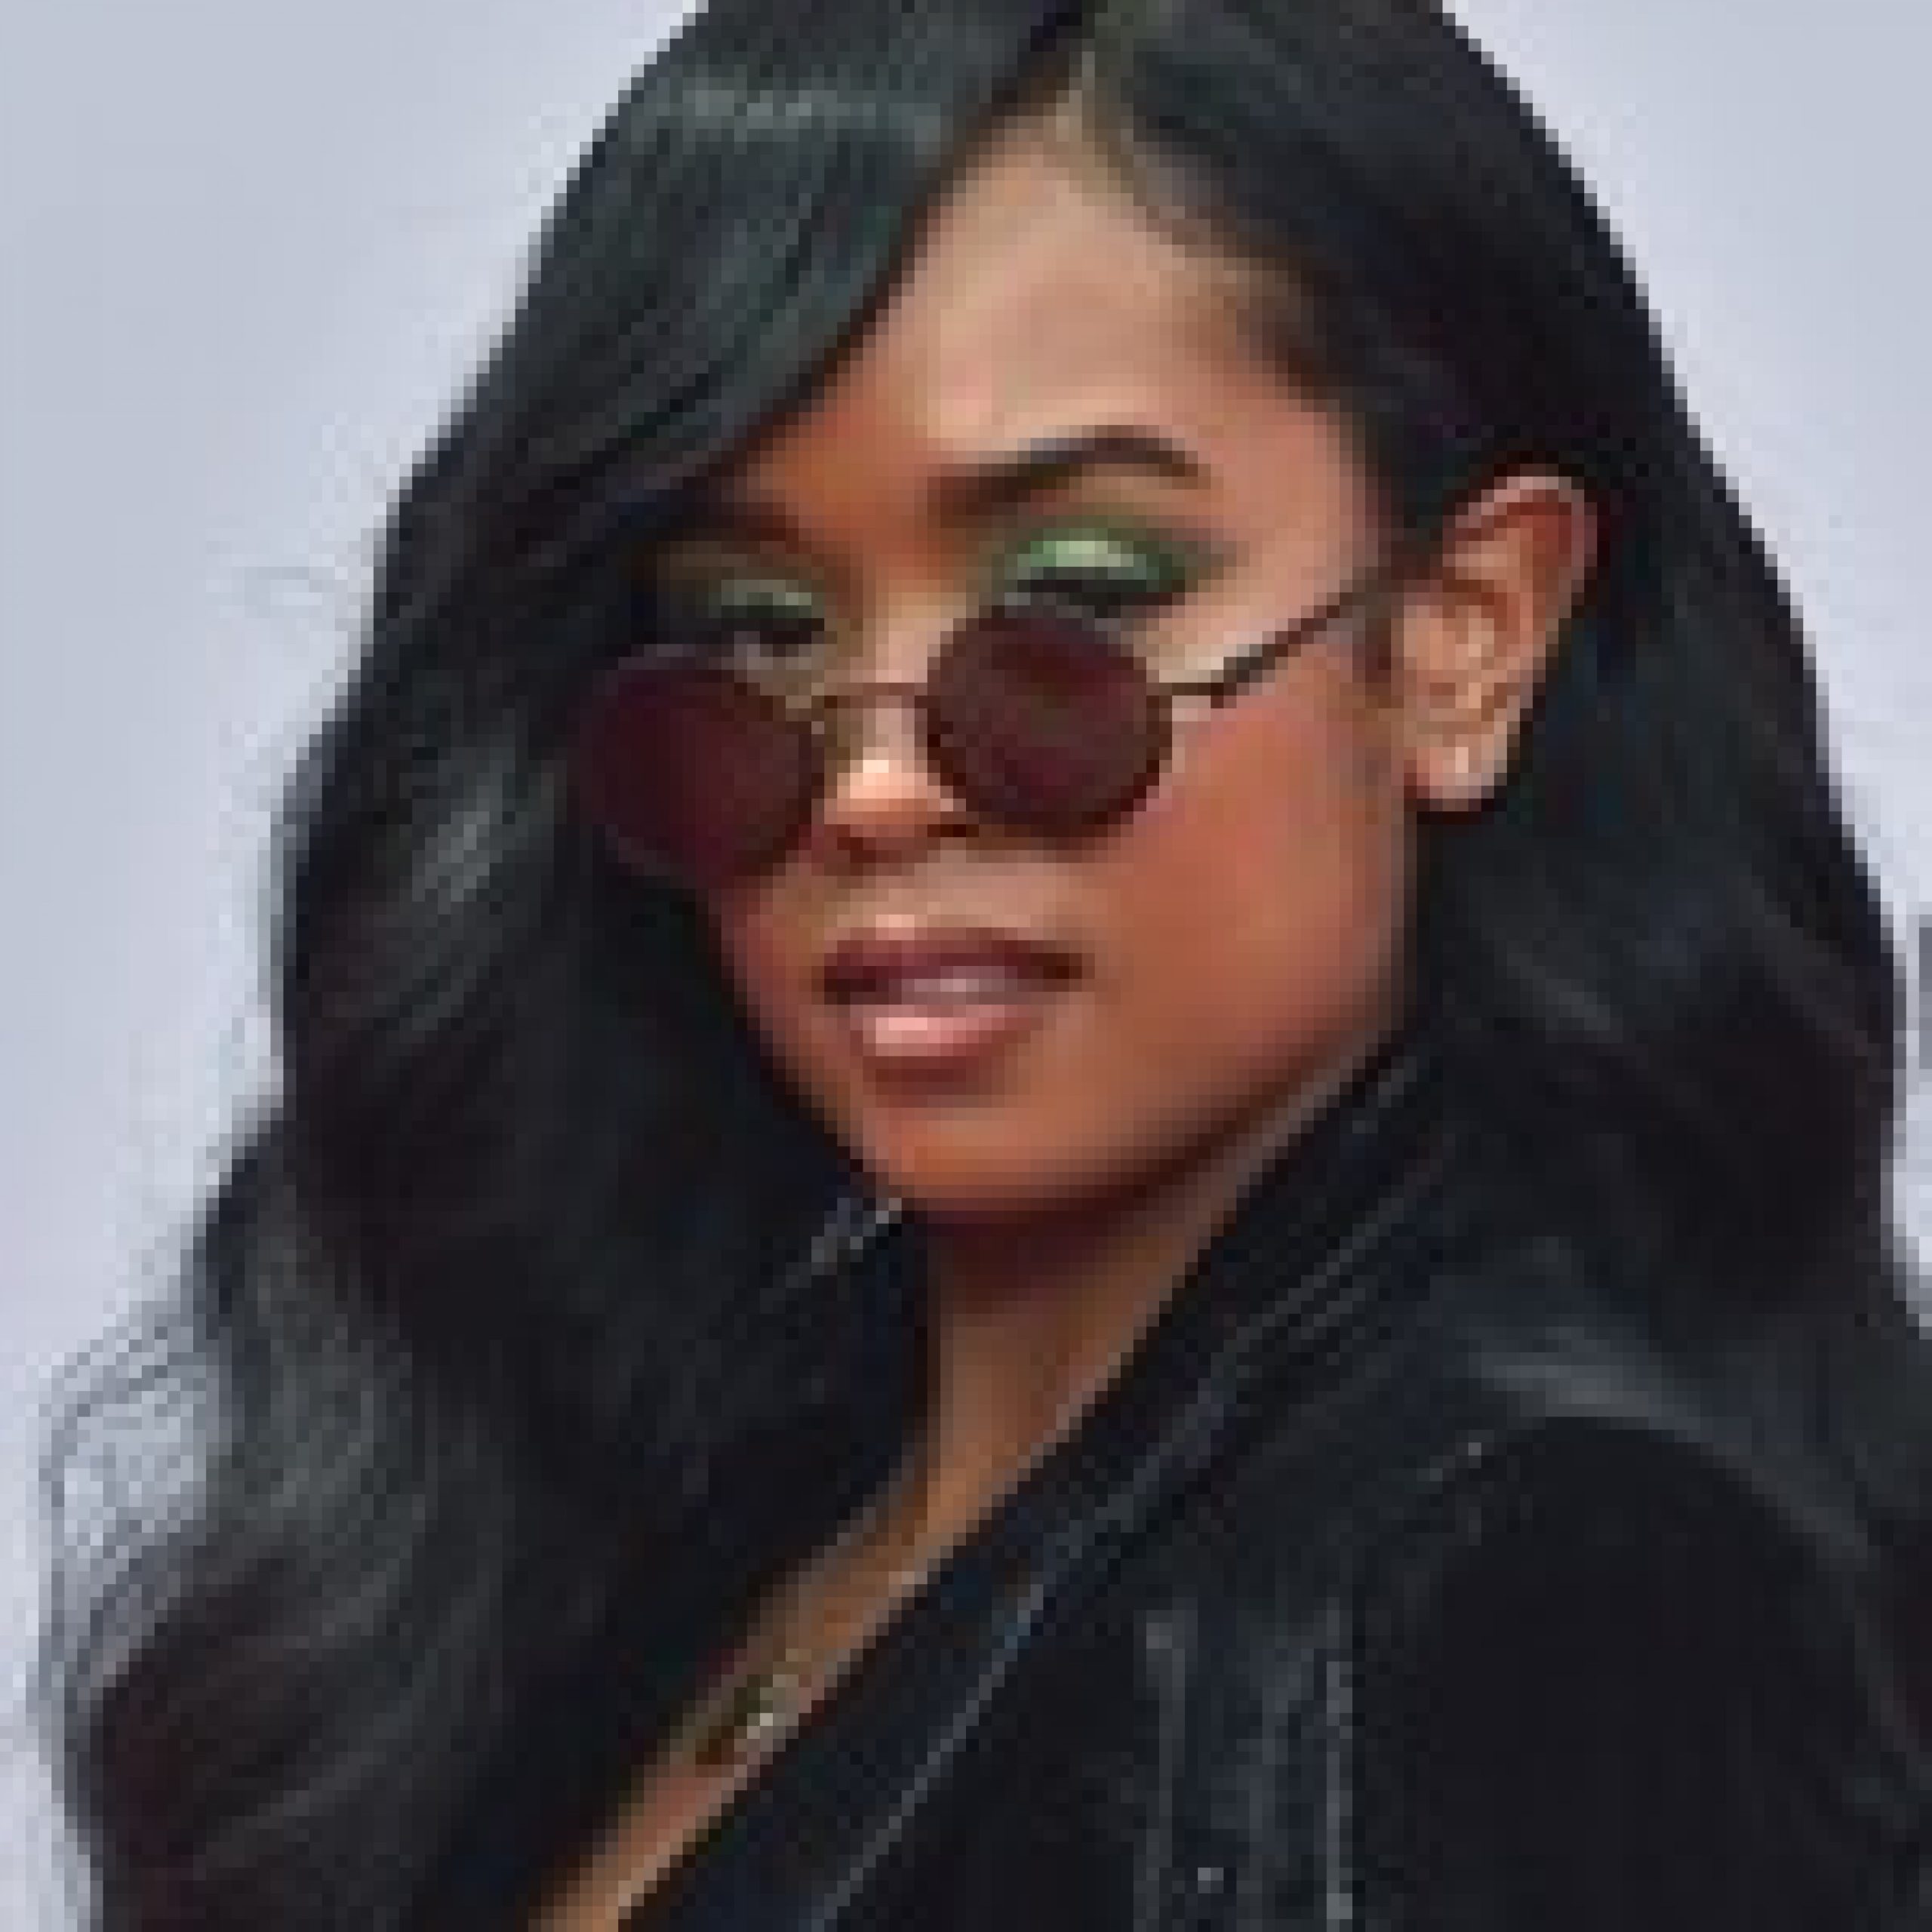 H.E.R. Among Artists Educating Kids on Civics in Netflix Series ‘We the People’